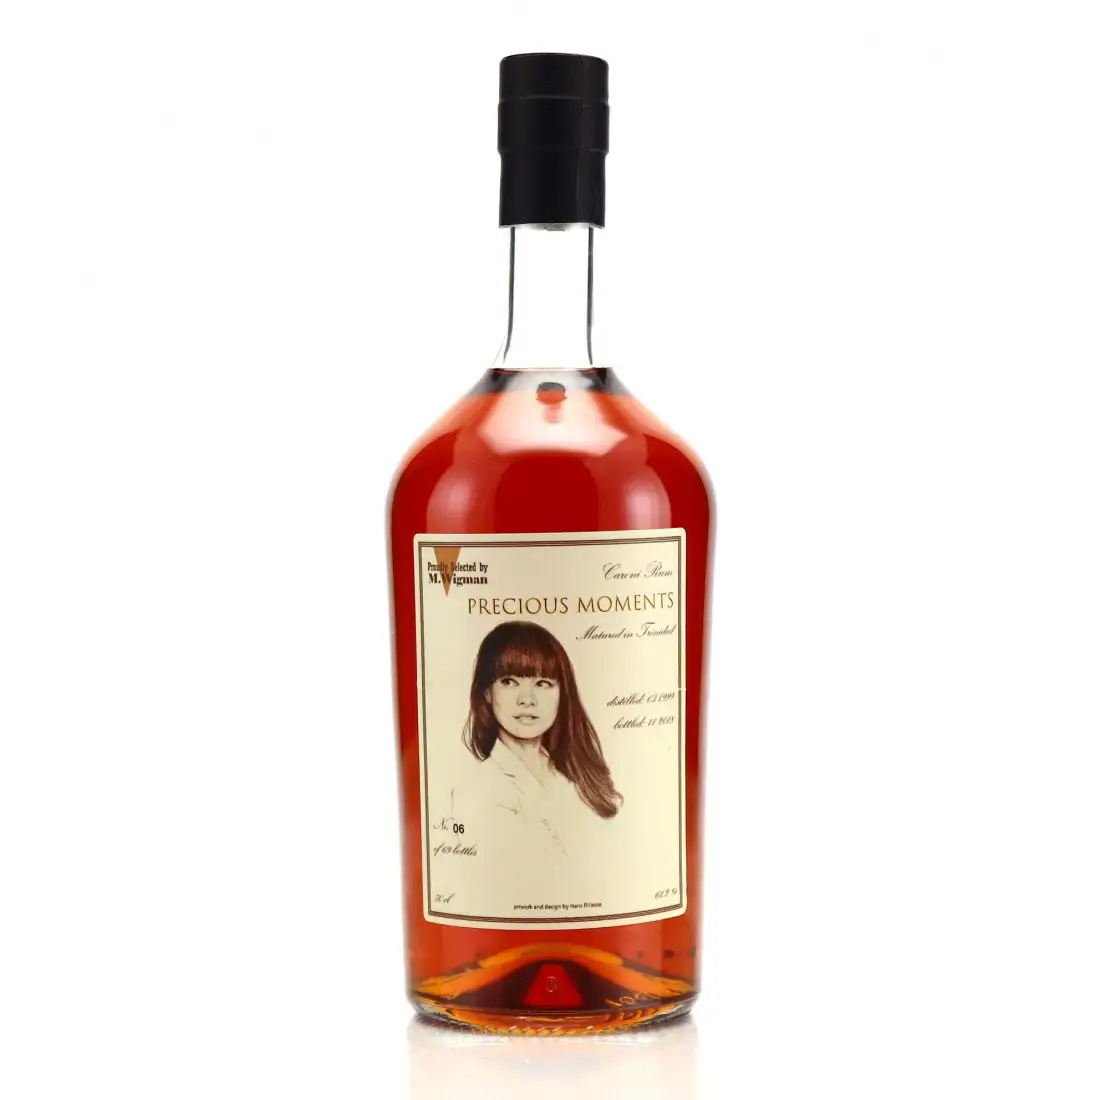 Image of the front of the bottle of the rum Precious Moments